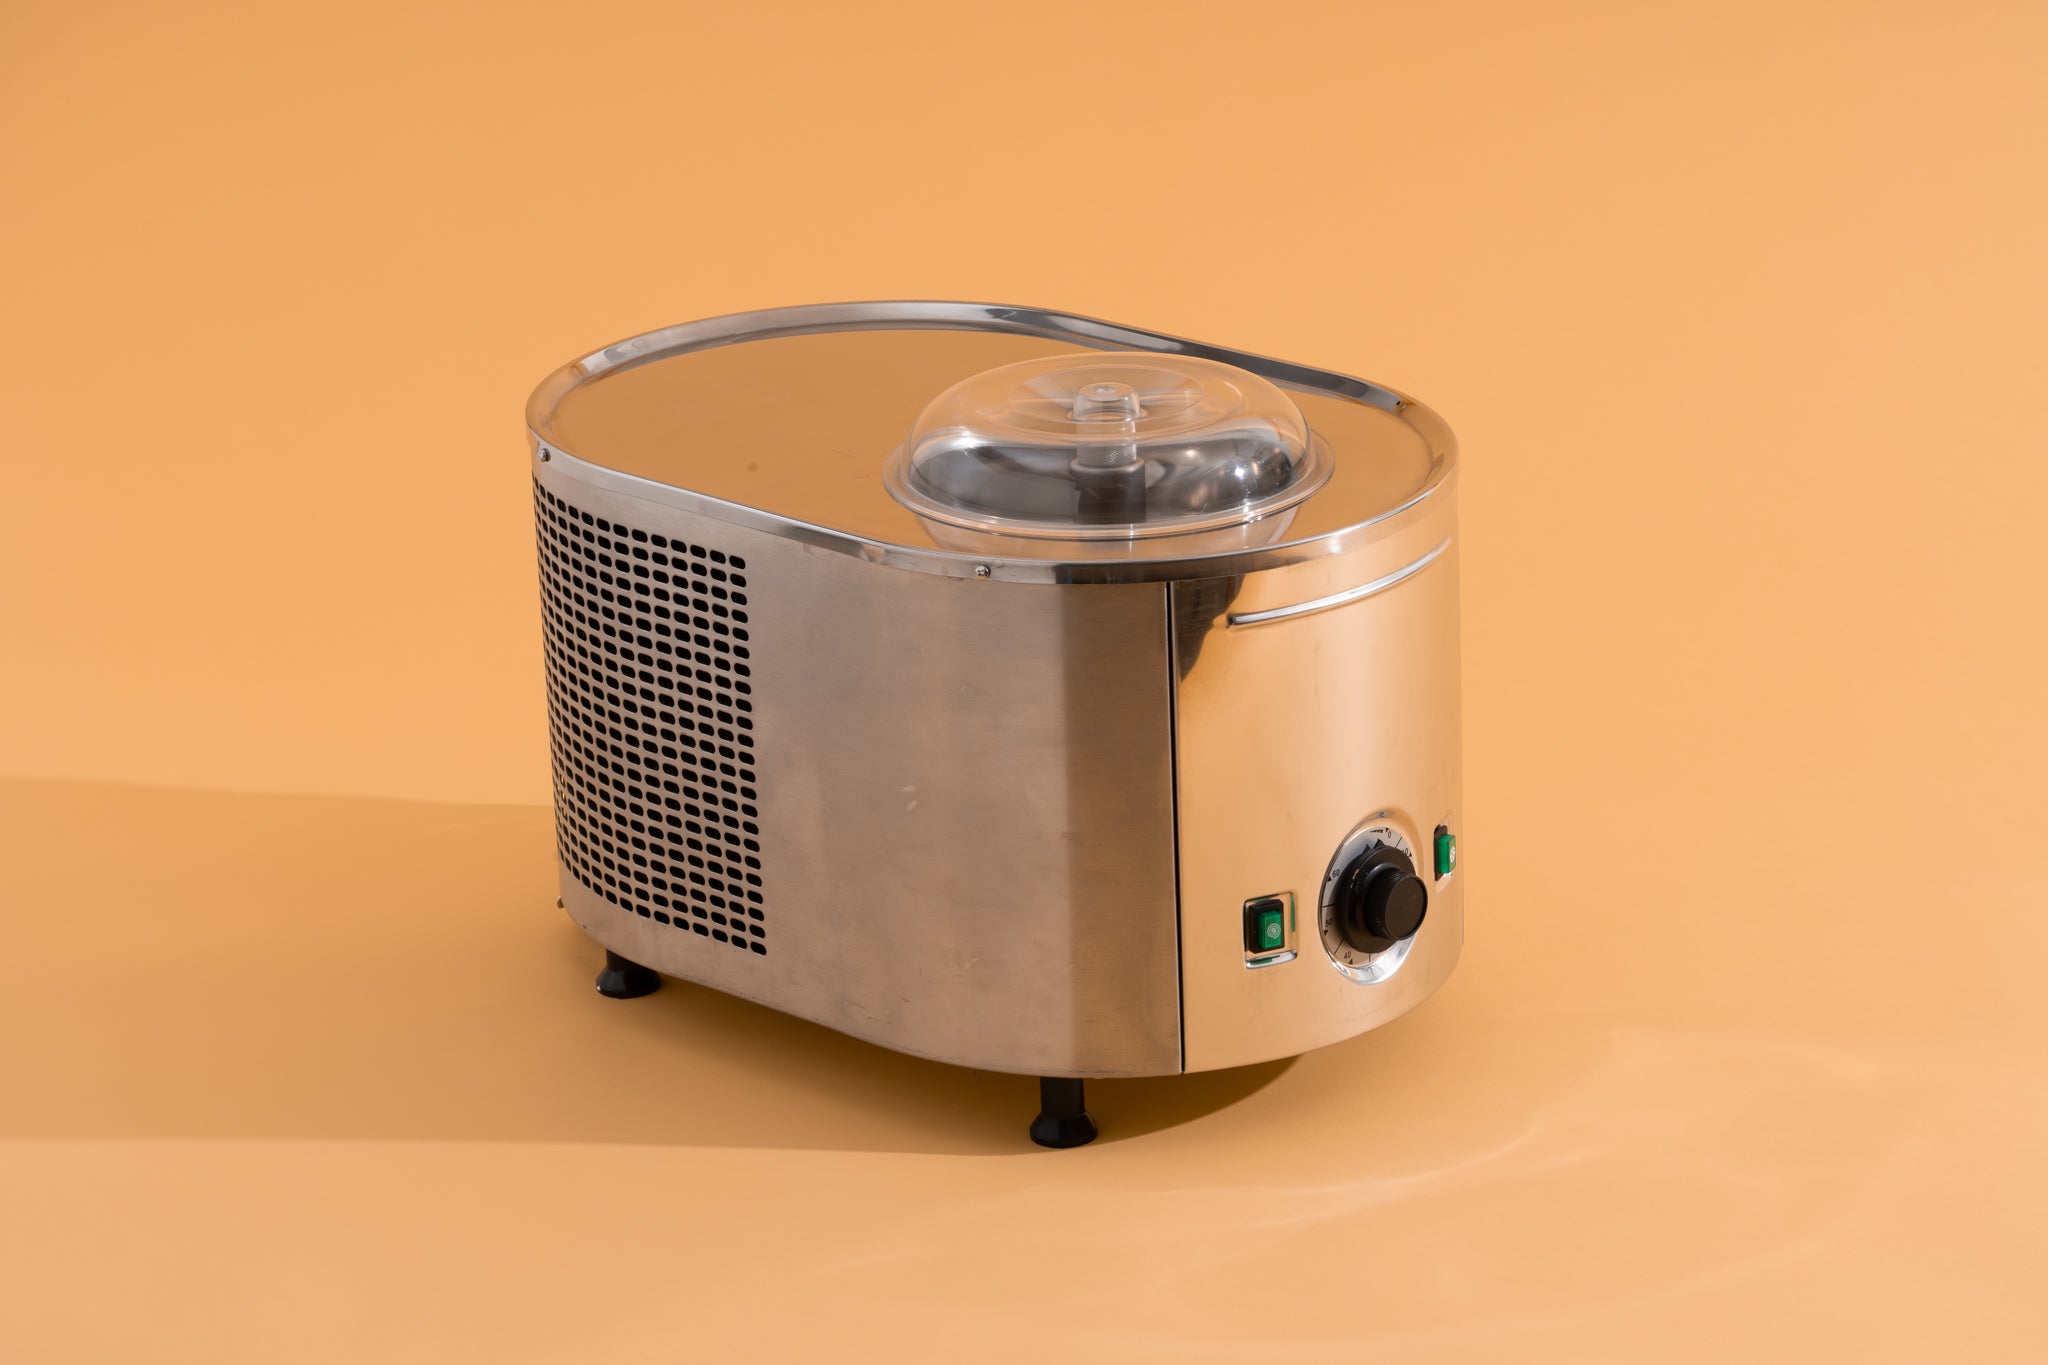 Ice Cream Maker Review: Top Picks and Buying Guide